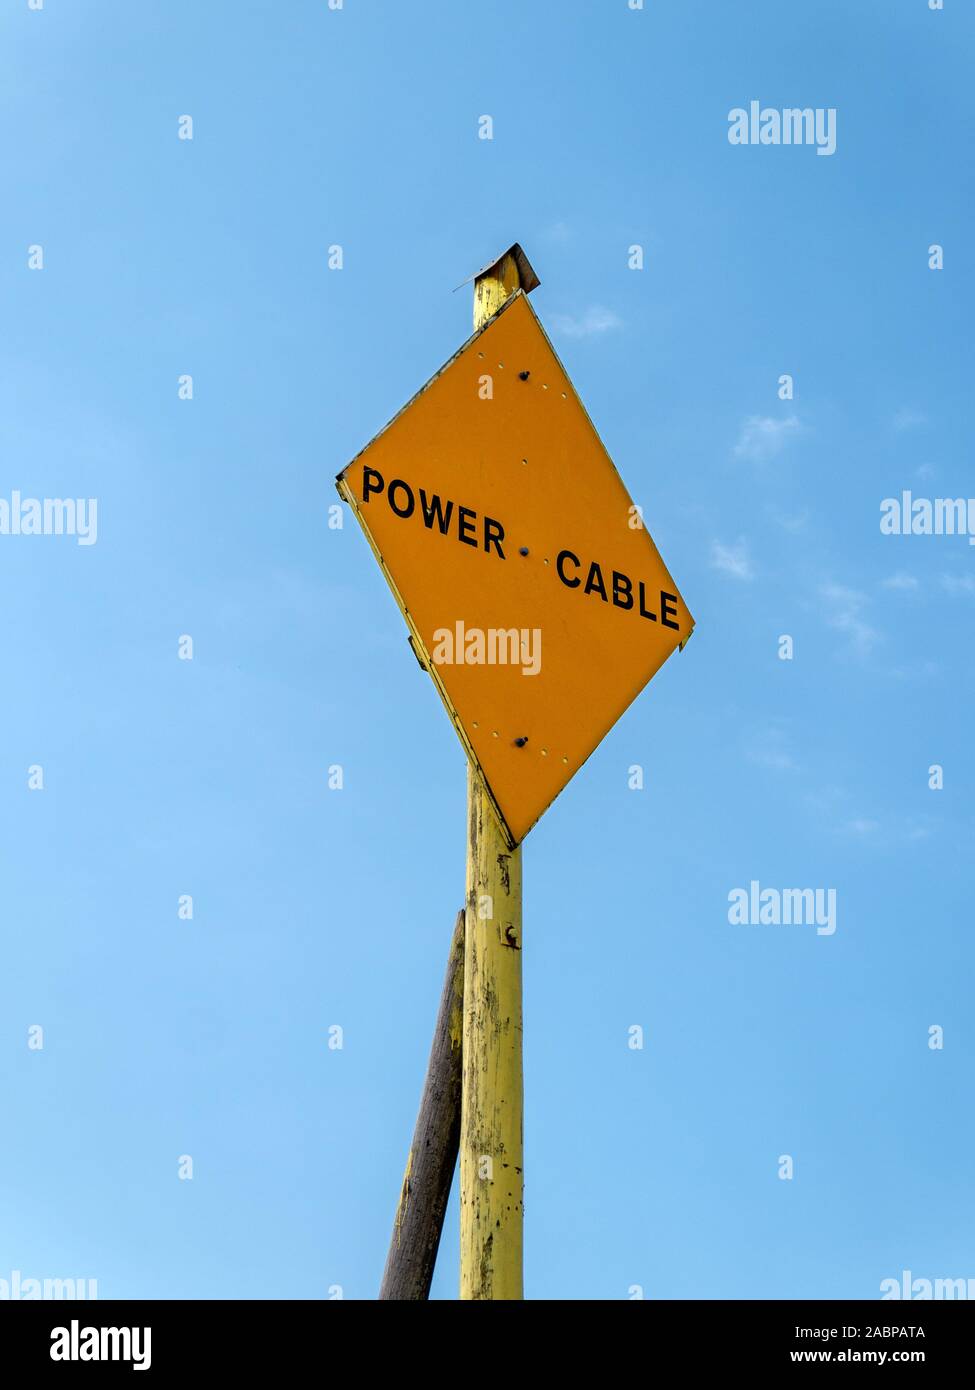 Yellow diamond shaped undersea power cable warning sign against blue sky, Isle of Colonsay, Scotland, UK Stock Photo